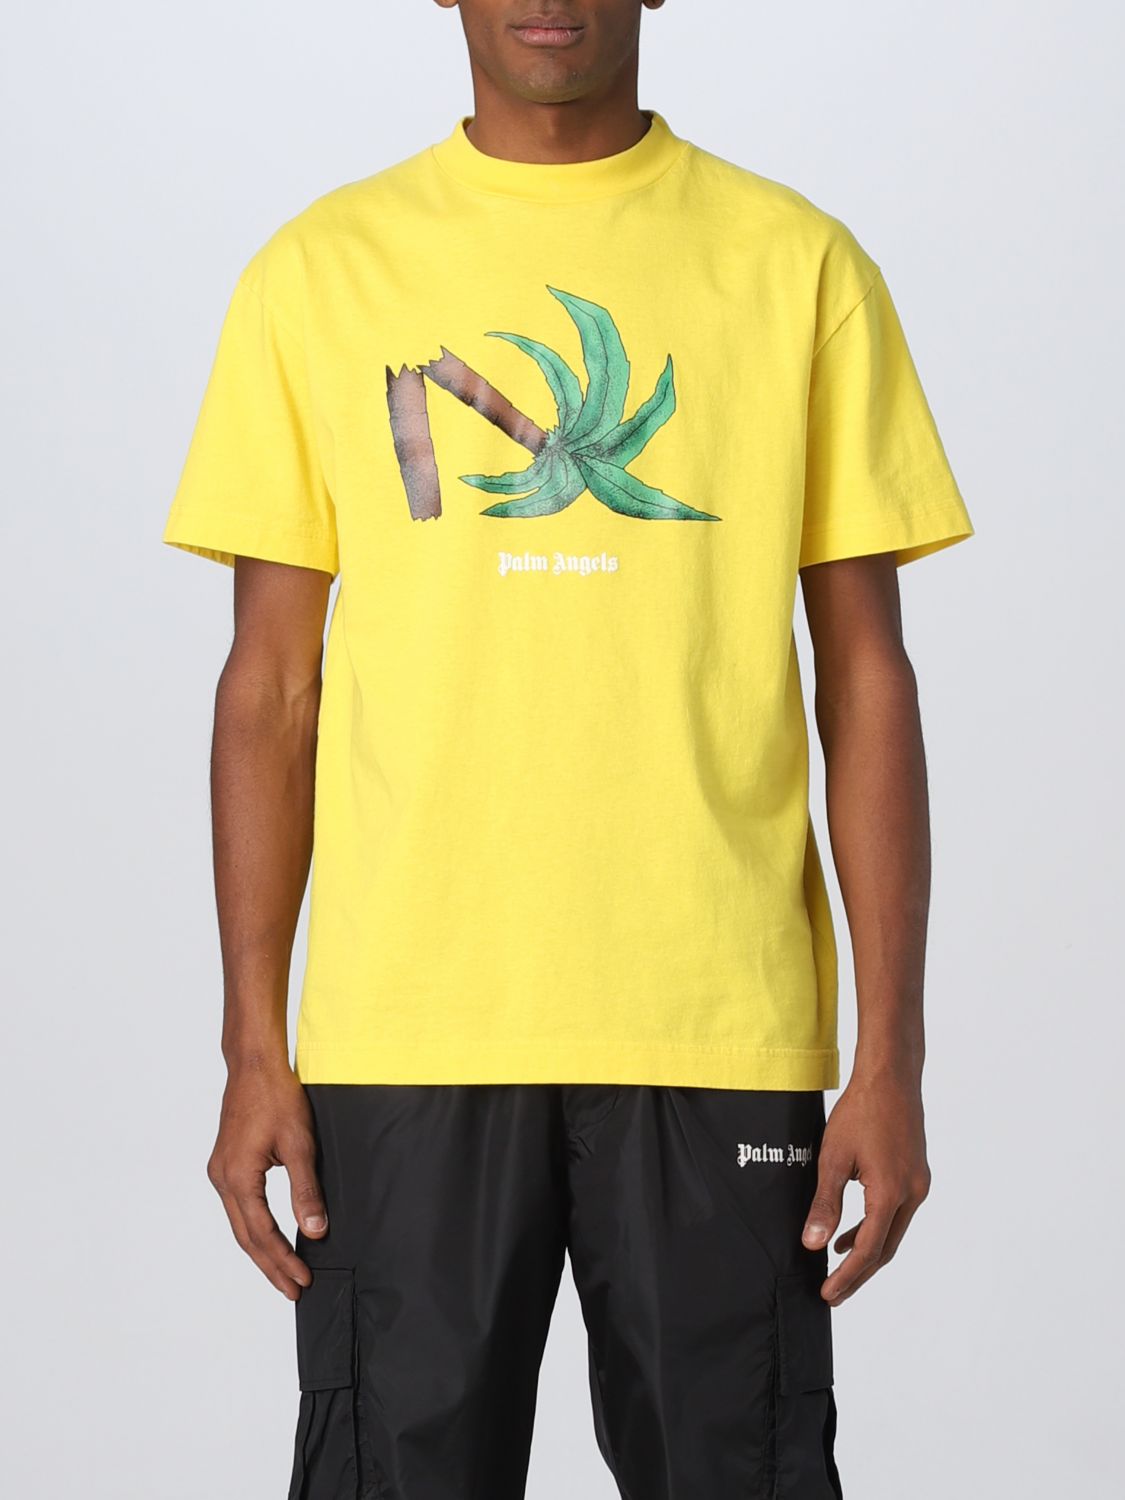 PALM ANGELS: t-shirt for man - Yellow  Palm Angels t-shirt  PMAA001C99JER013 online at